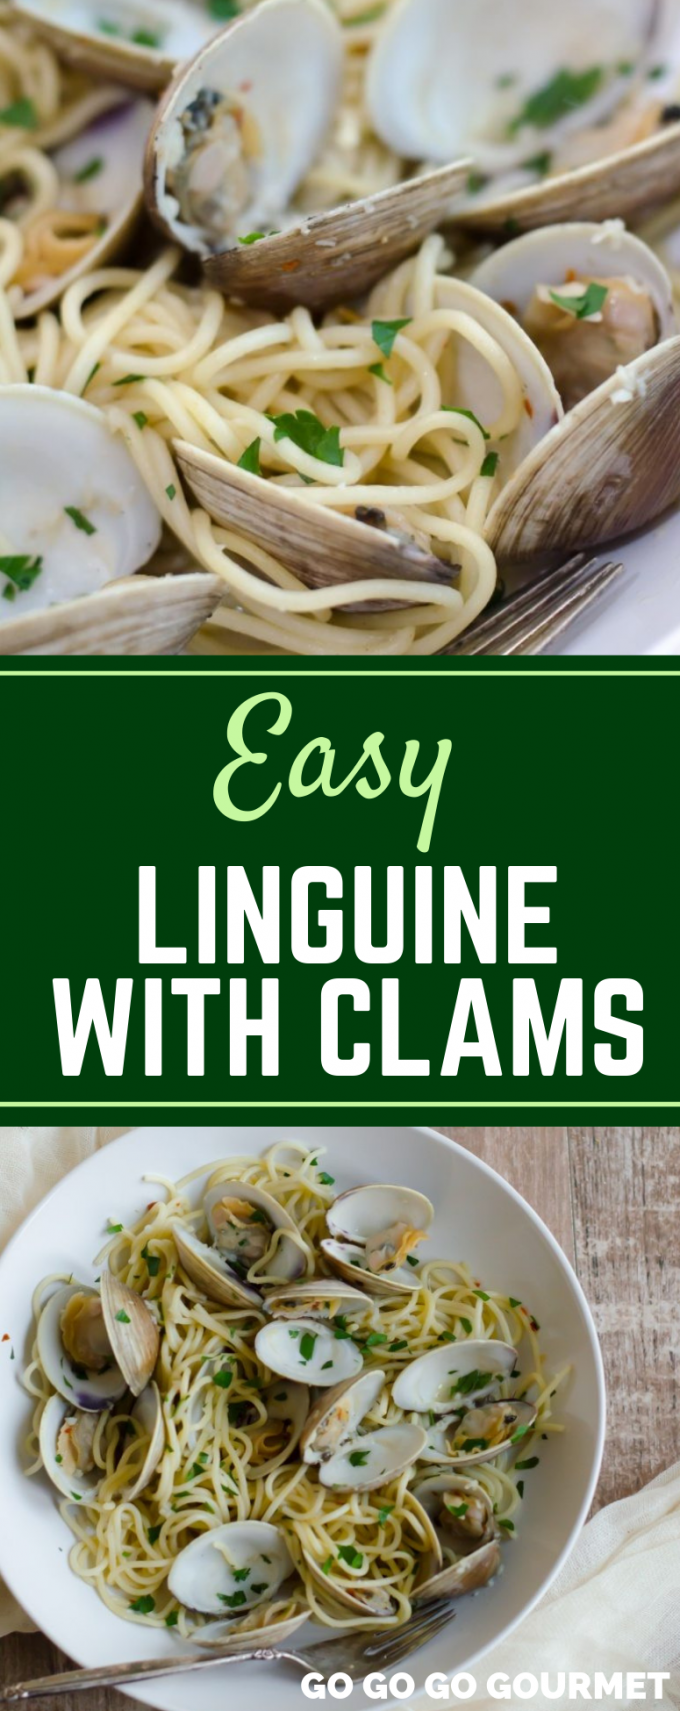 This easy Linguine with Clams recipe is the best! Made with a sauce that includes white wines, garlic and olive oils, it's sure to become one of your favorite pasta dishes! Dinners don't get much easier than this! #gogogogourmet #linquinewithclams #linguineandclams #easypastarecipe via @gogogogourmet